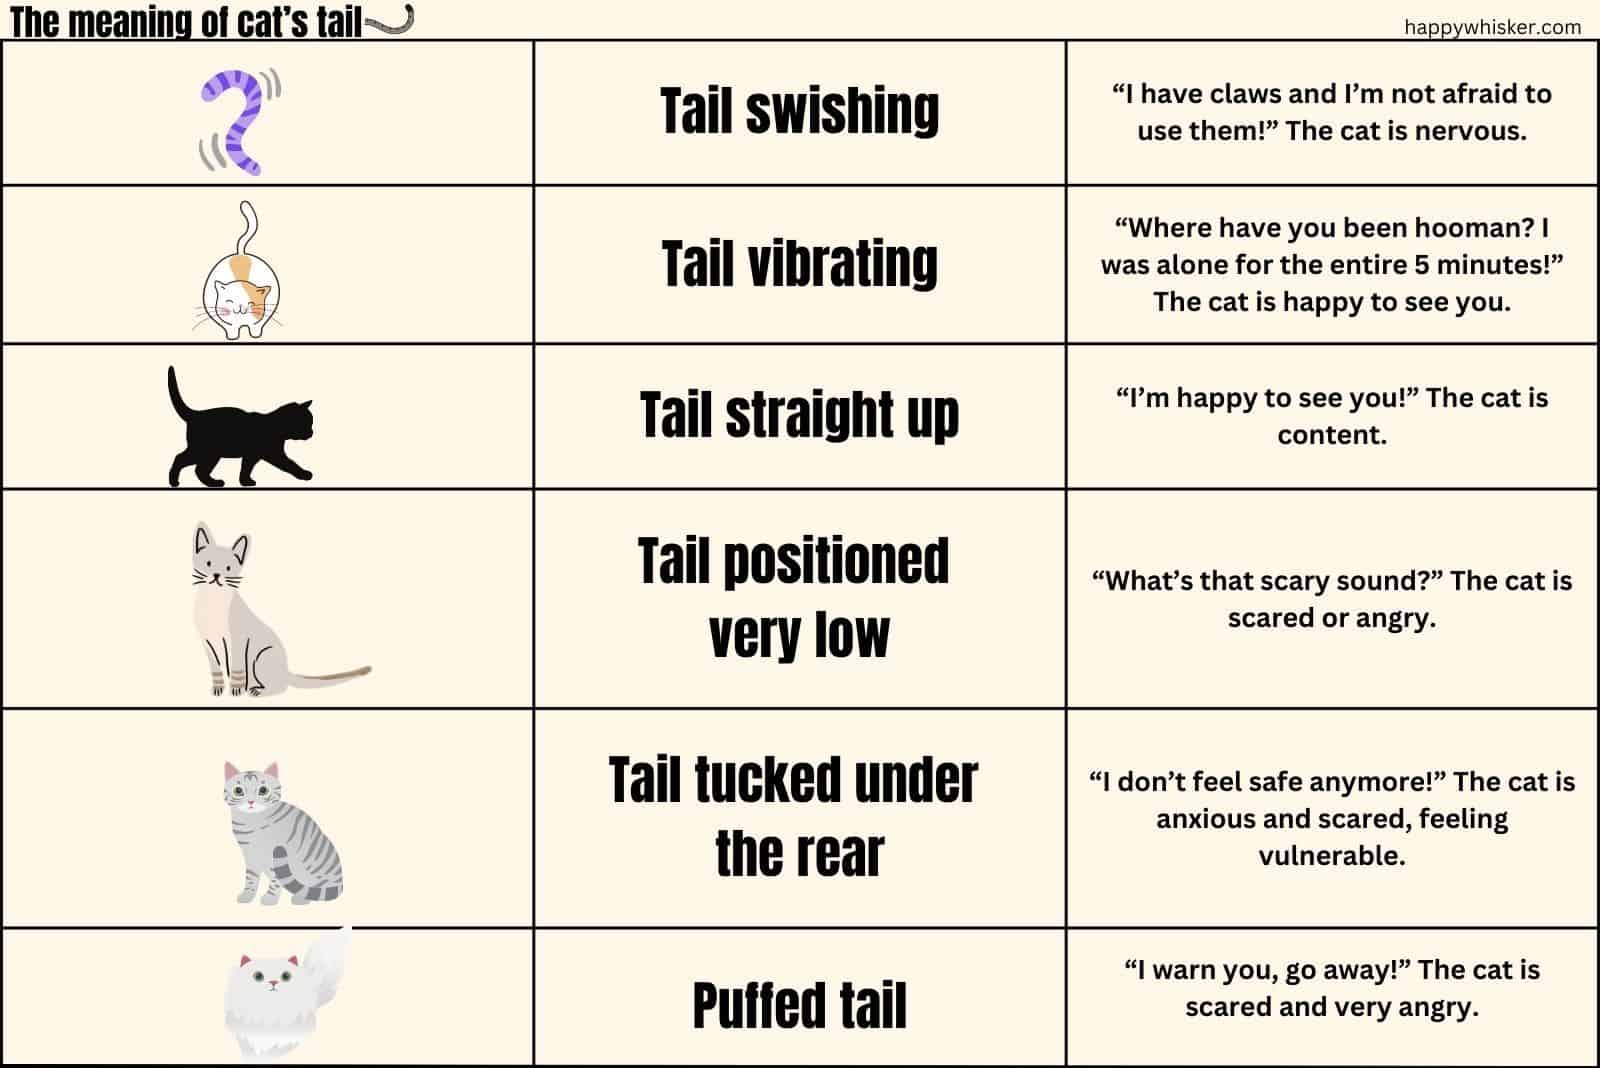 The meaning of cat’s tail